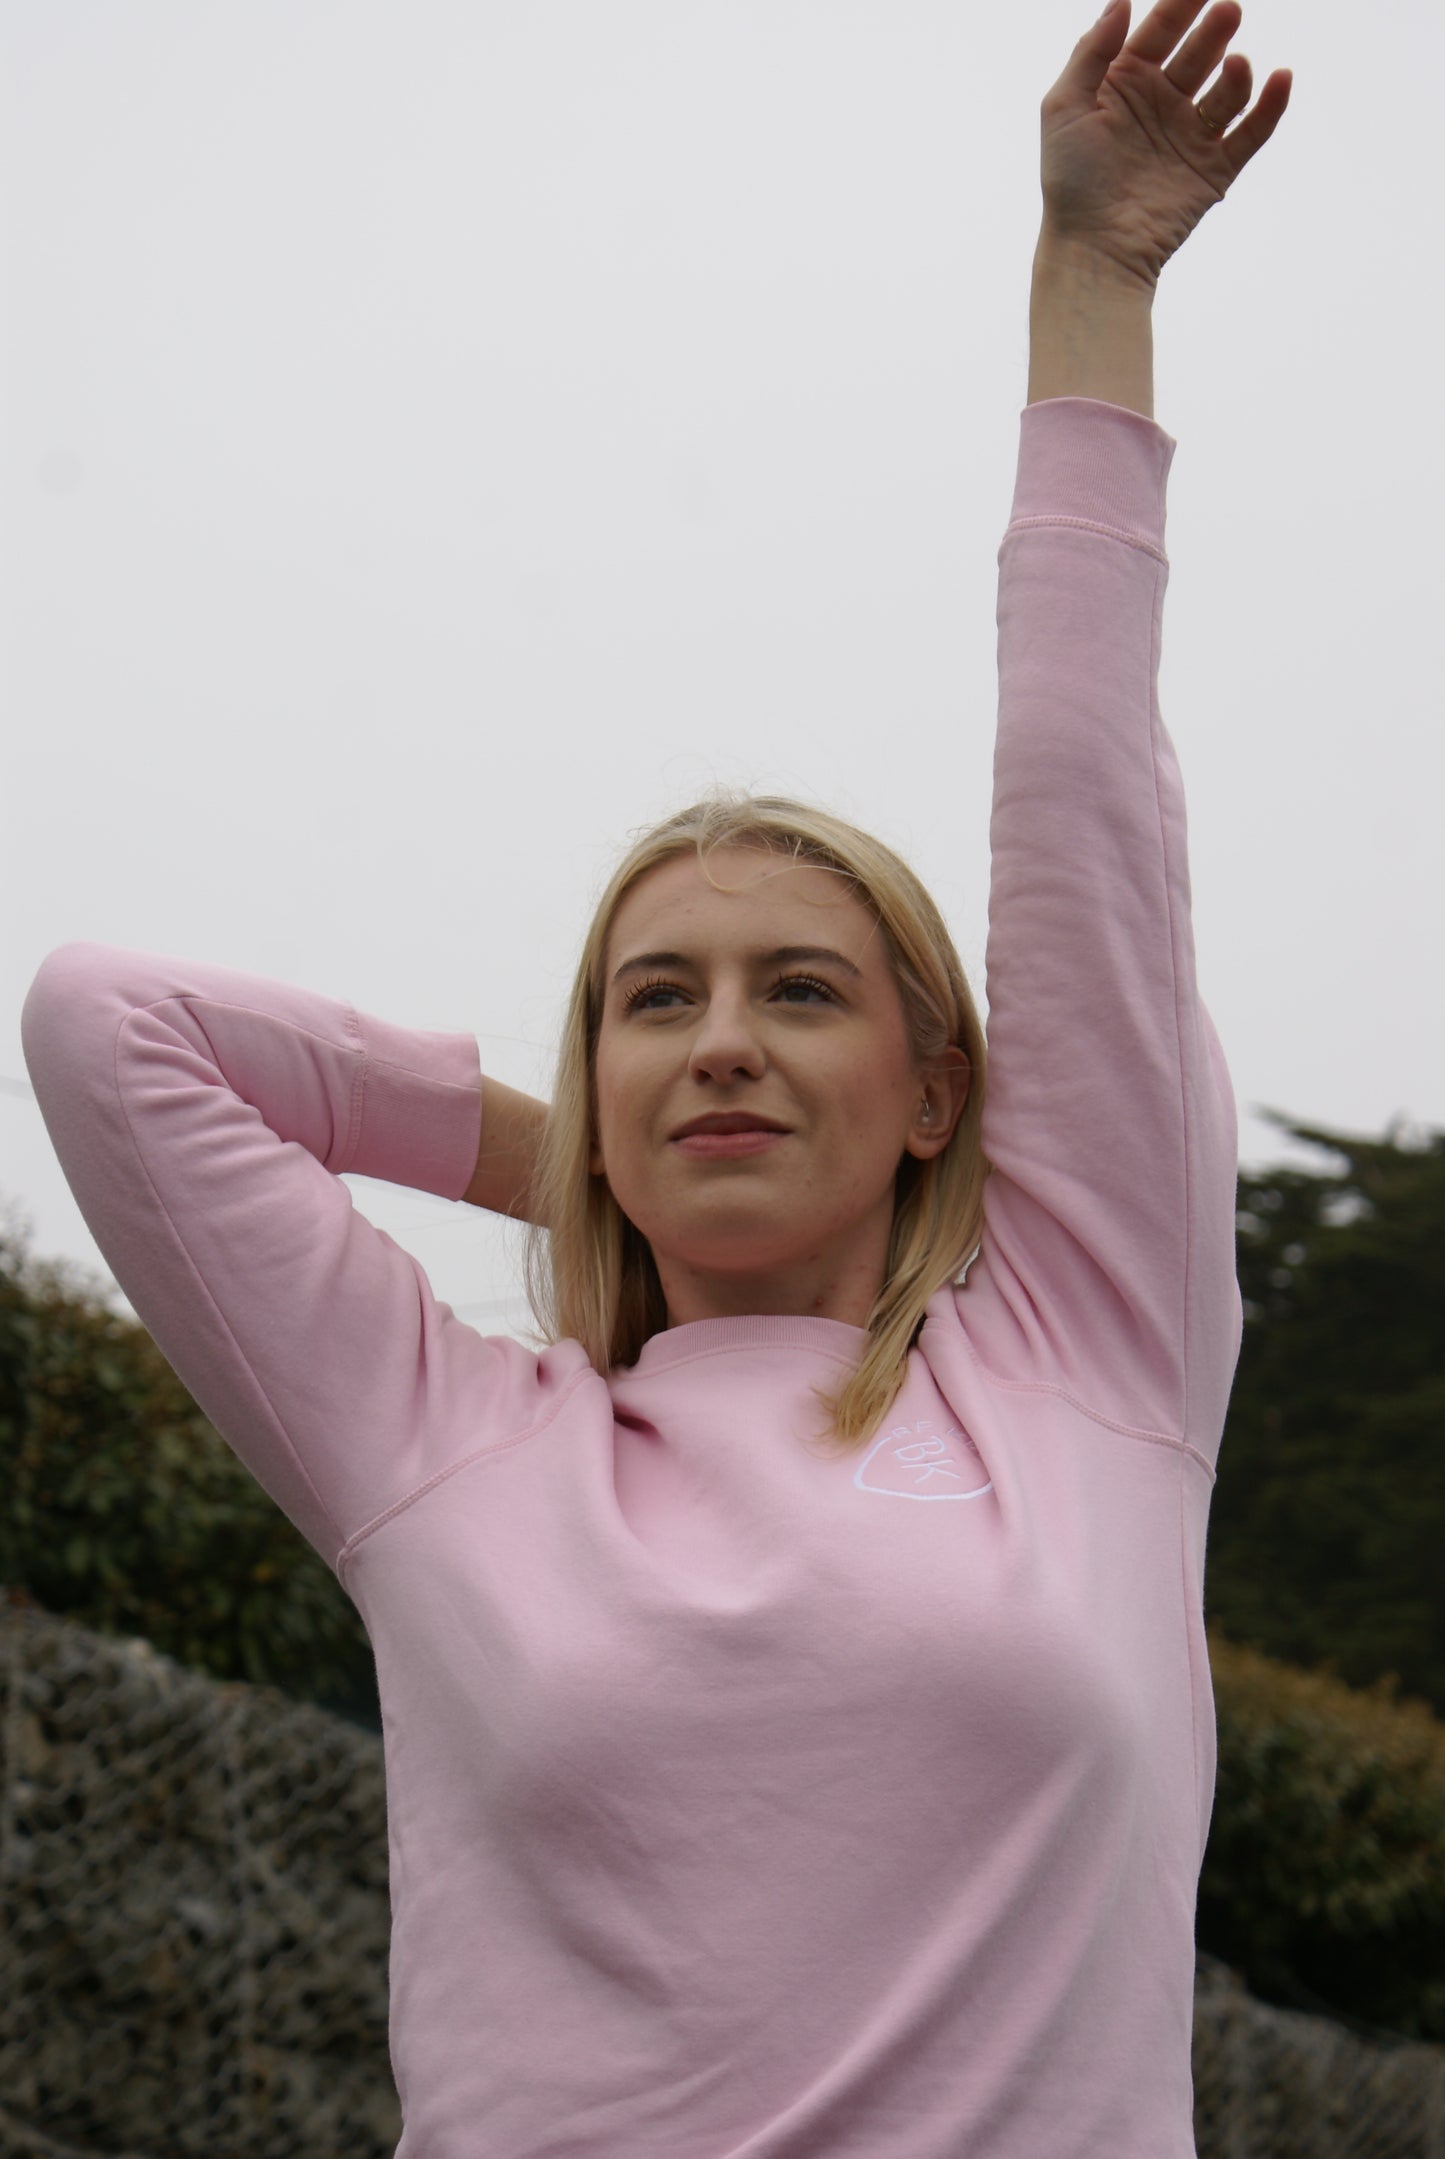 A woman looks at peace, she's wearing a Bubblegum Pink Organic Cotton Sweatshirt from the Be Kind Apparel Original Collection